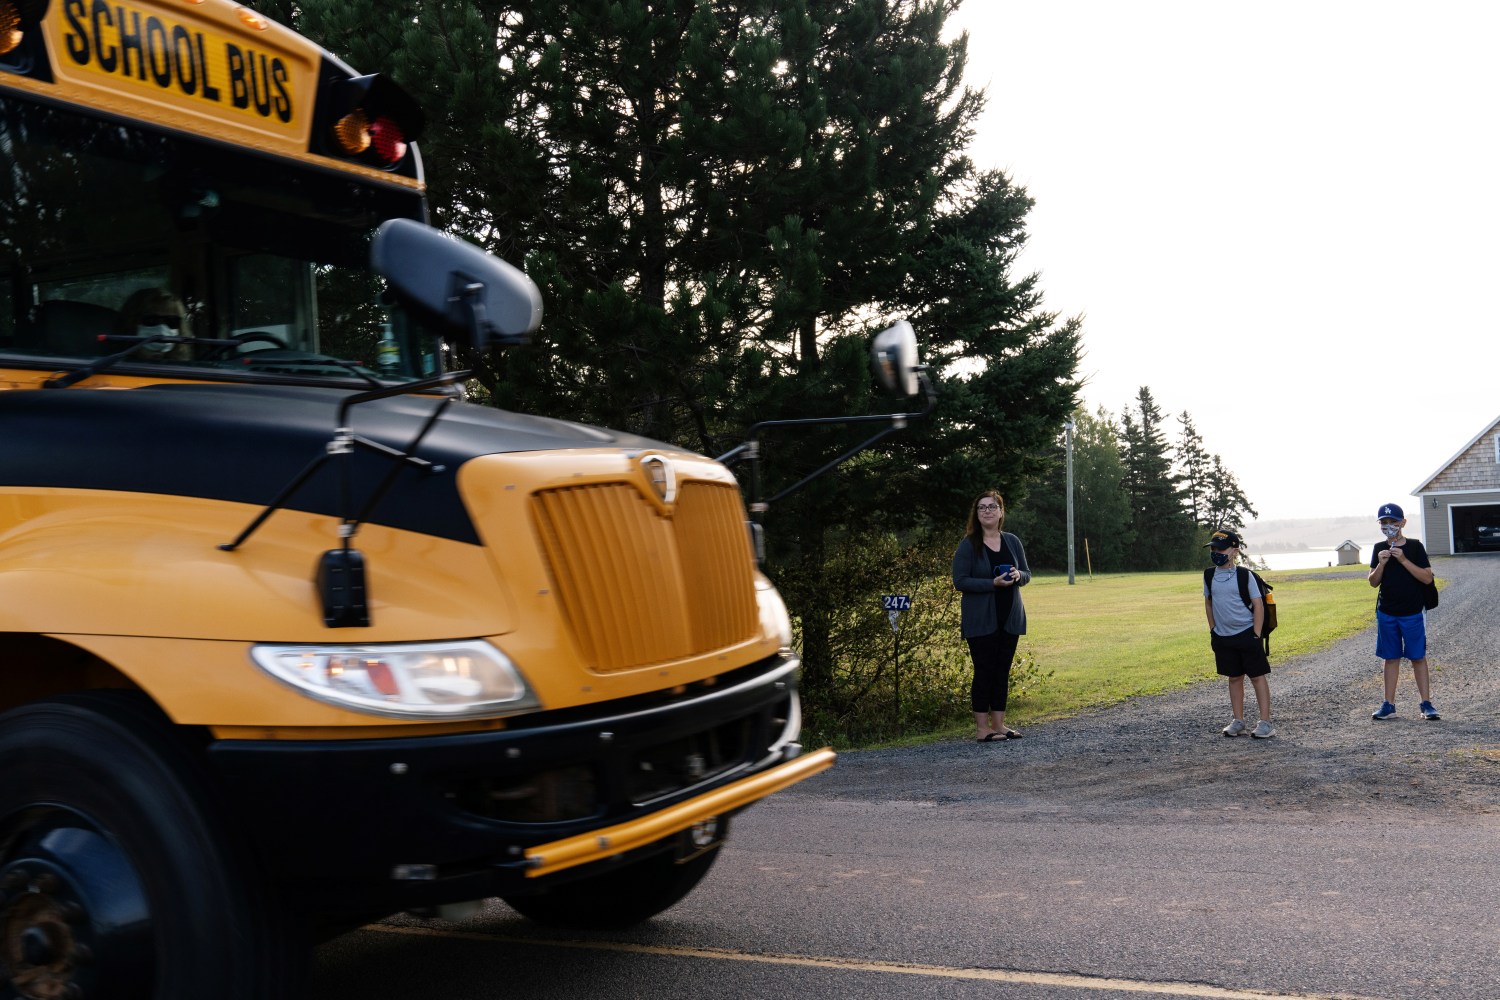 A school bus passes by as Monica Lee, Ronan Lee and Braydon Lee await their turn to load the bus as schools reopen with measures in place to prevent the spread of the coronavirus disease (COVID-19) in Vernon Bridge, Prince Edward Island, Canada September 8, 2020. REUTERS/John Morris